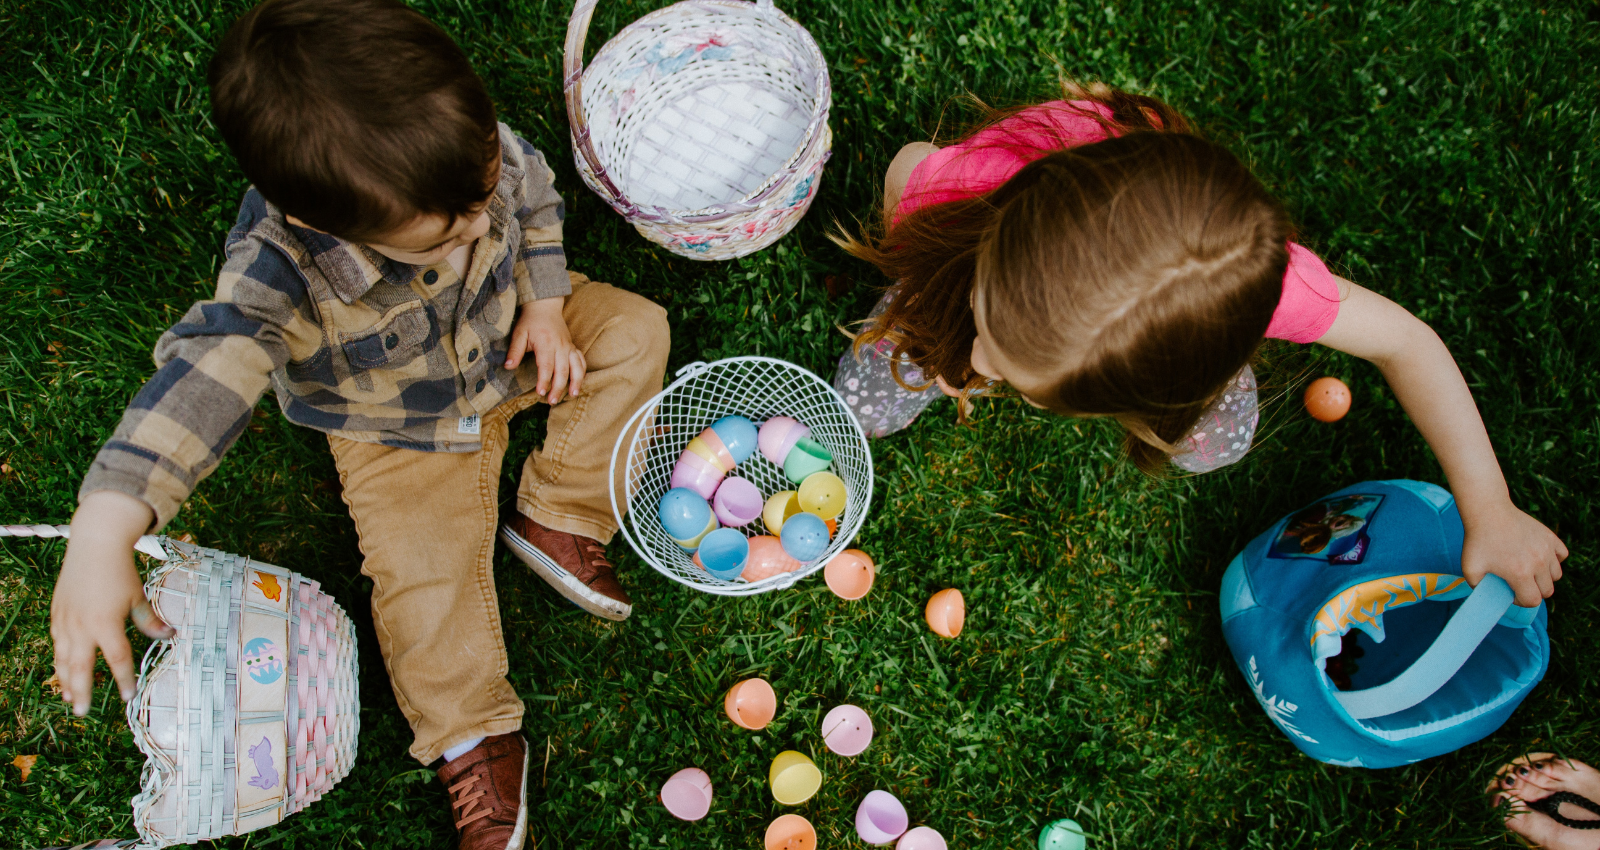 Overhead image of a boy and girl collecting Easter eggs in baskets